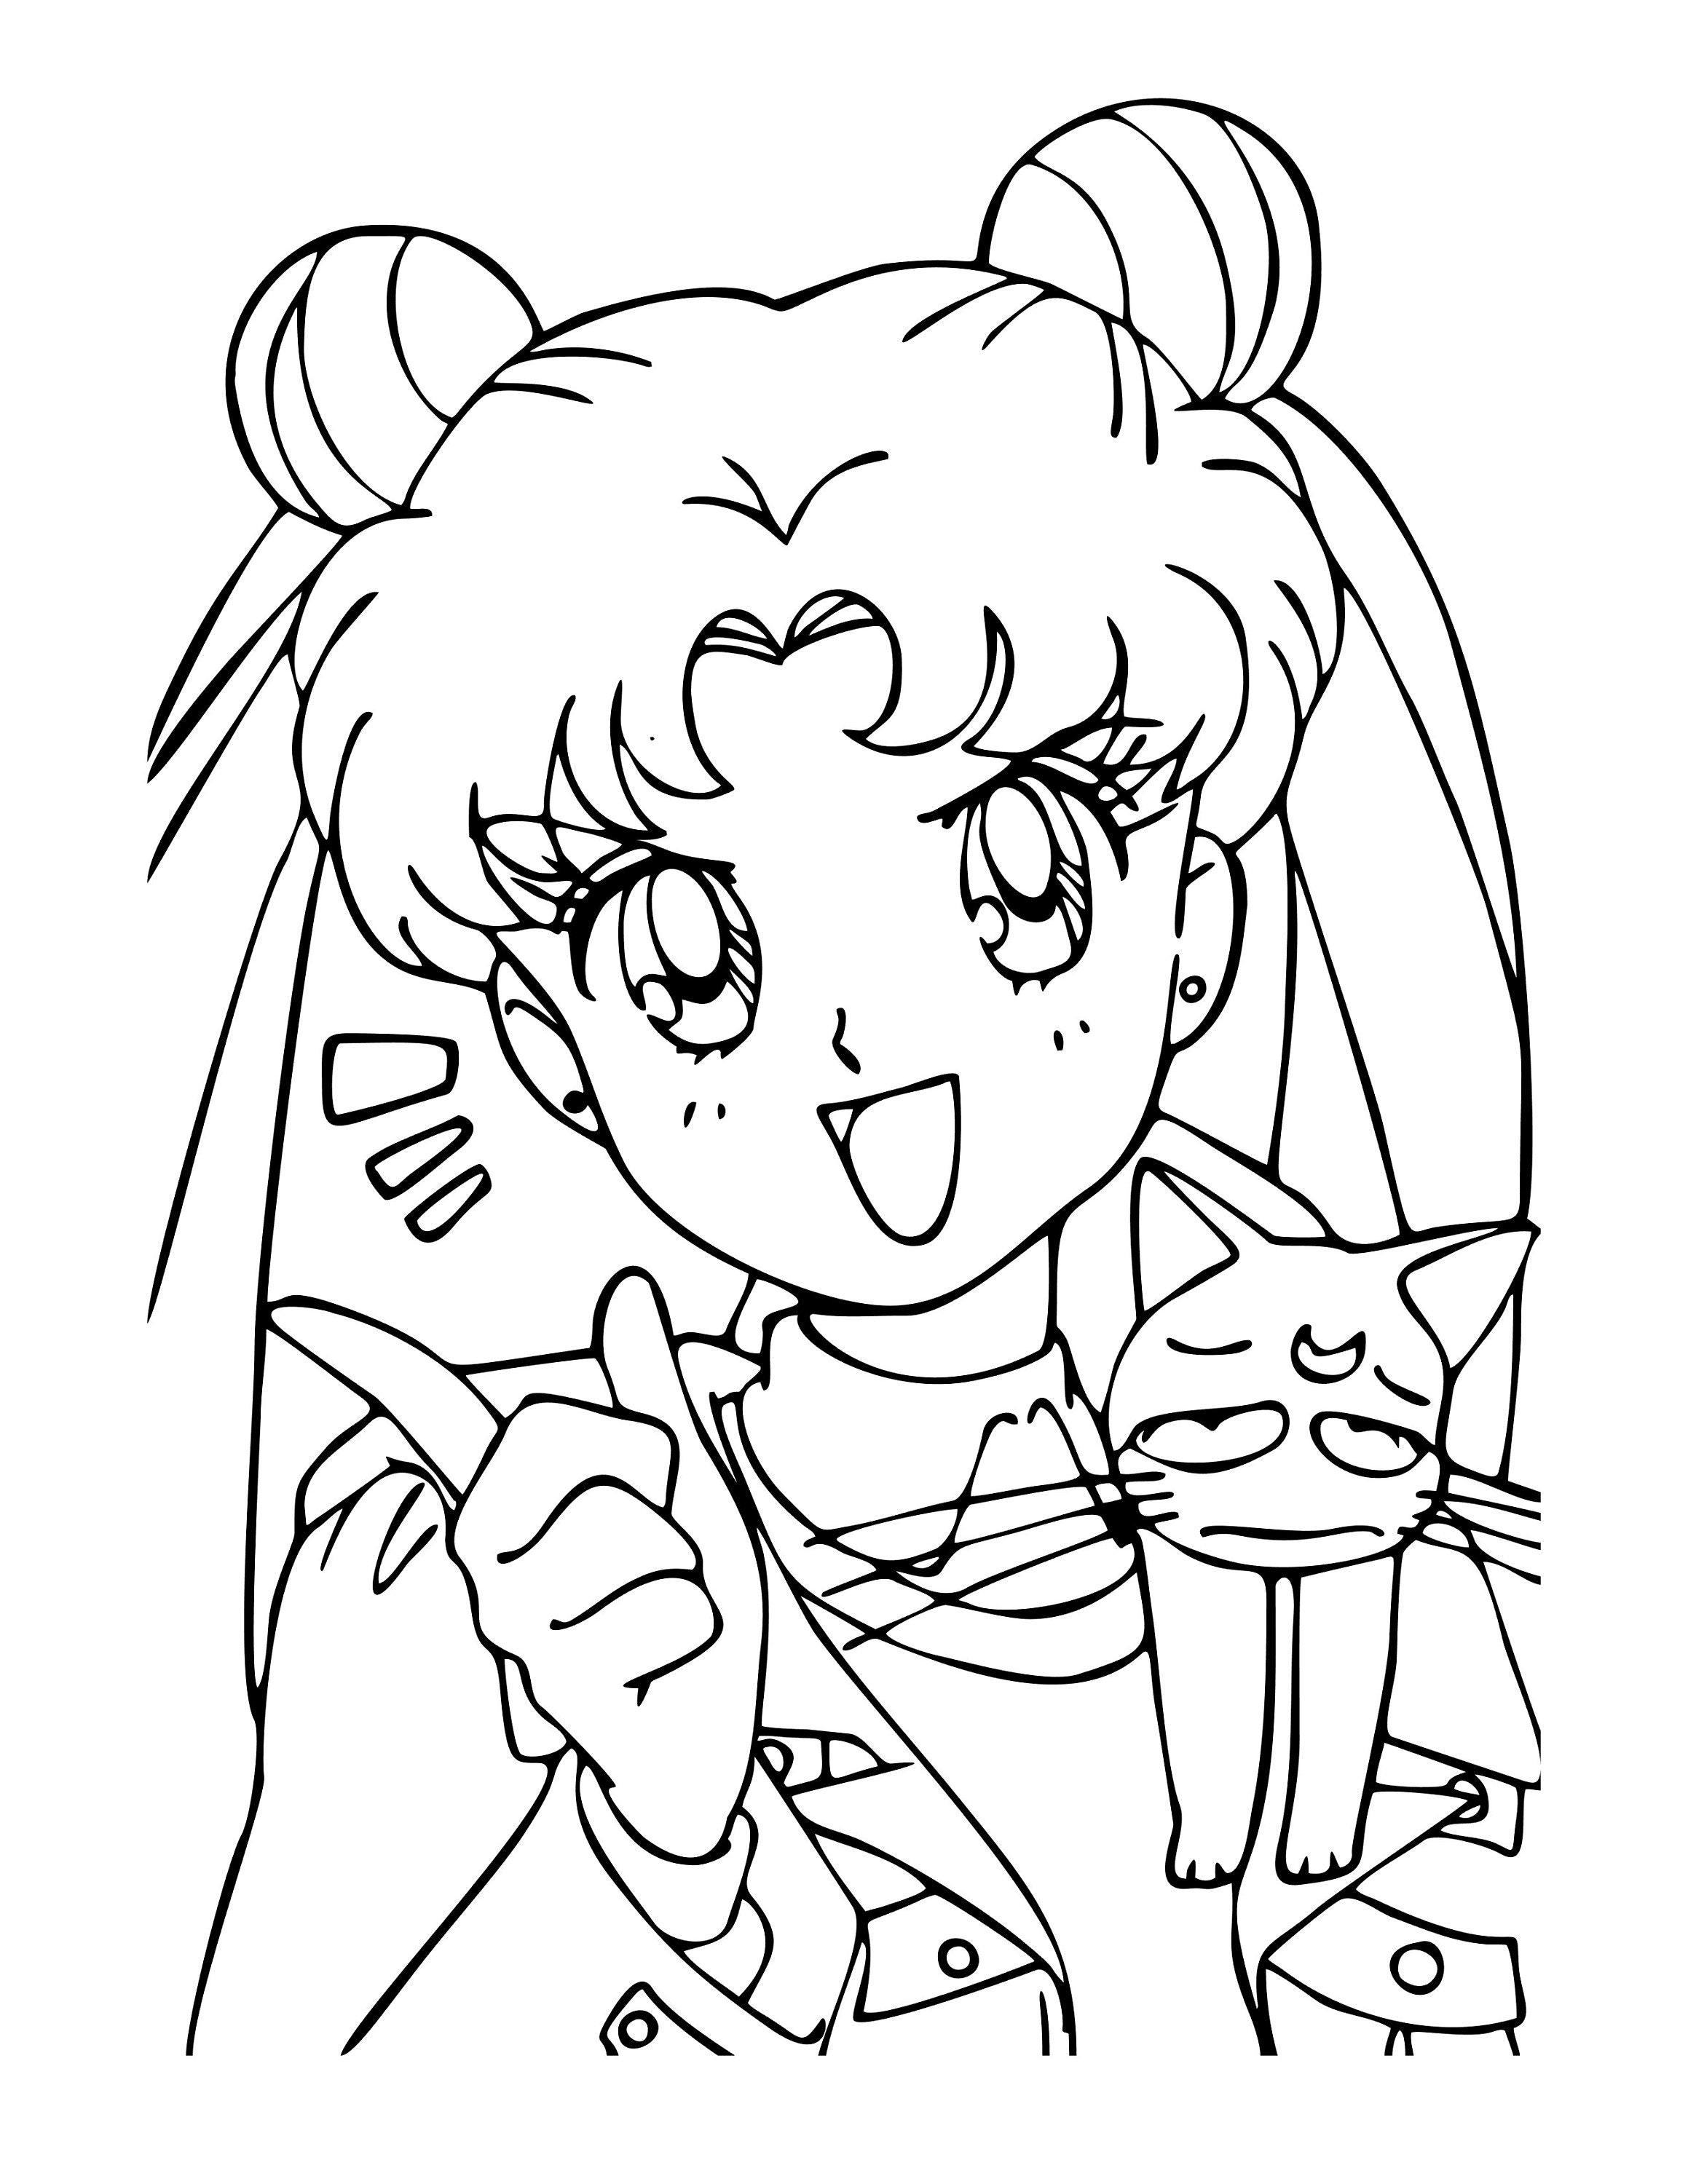 Sailor Moon Anime Coloring Pages Fun for Kids and All Ages   Etsy ...